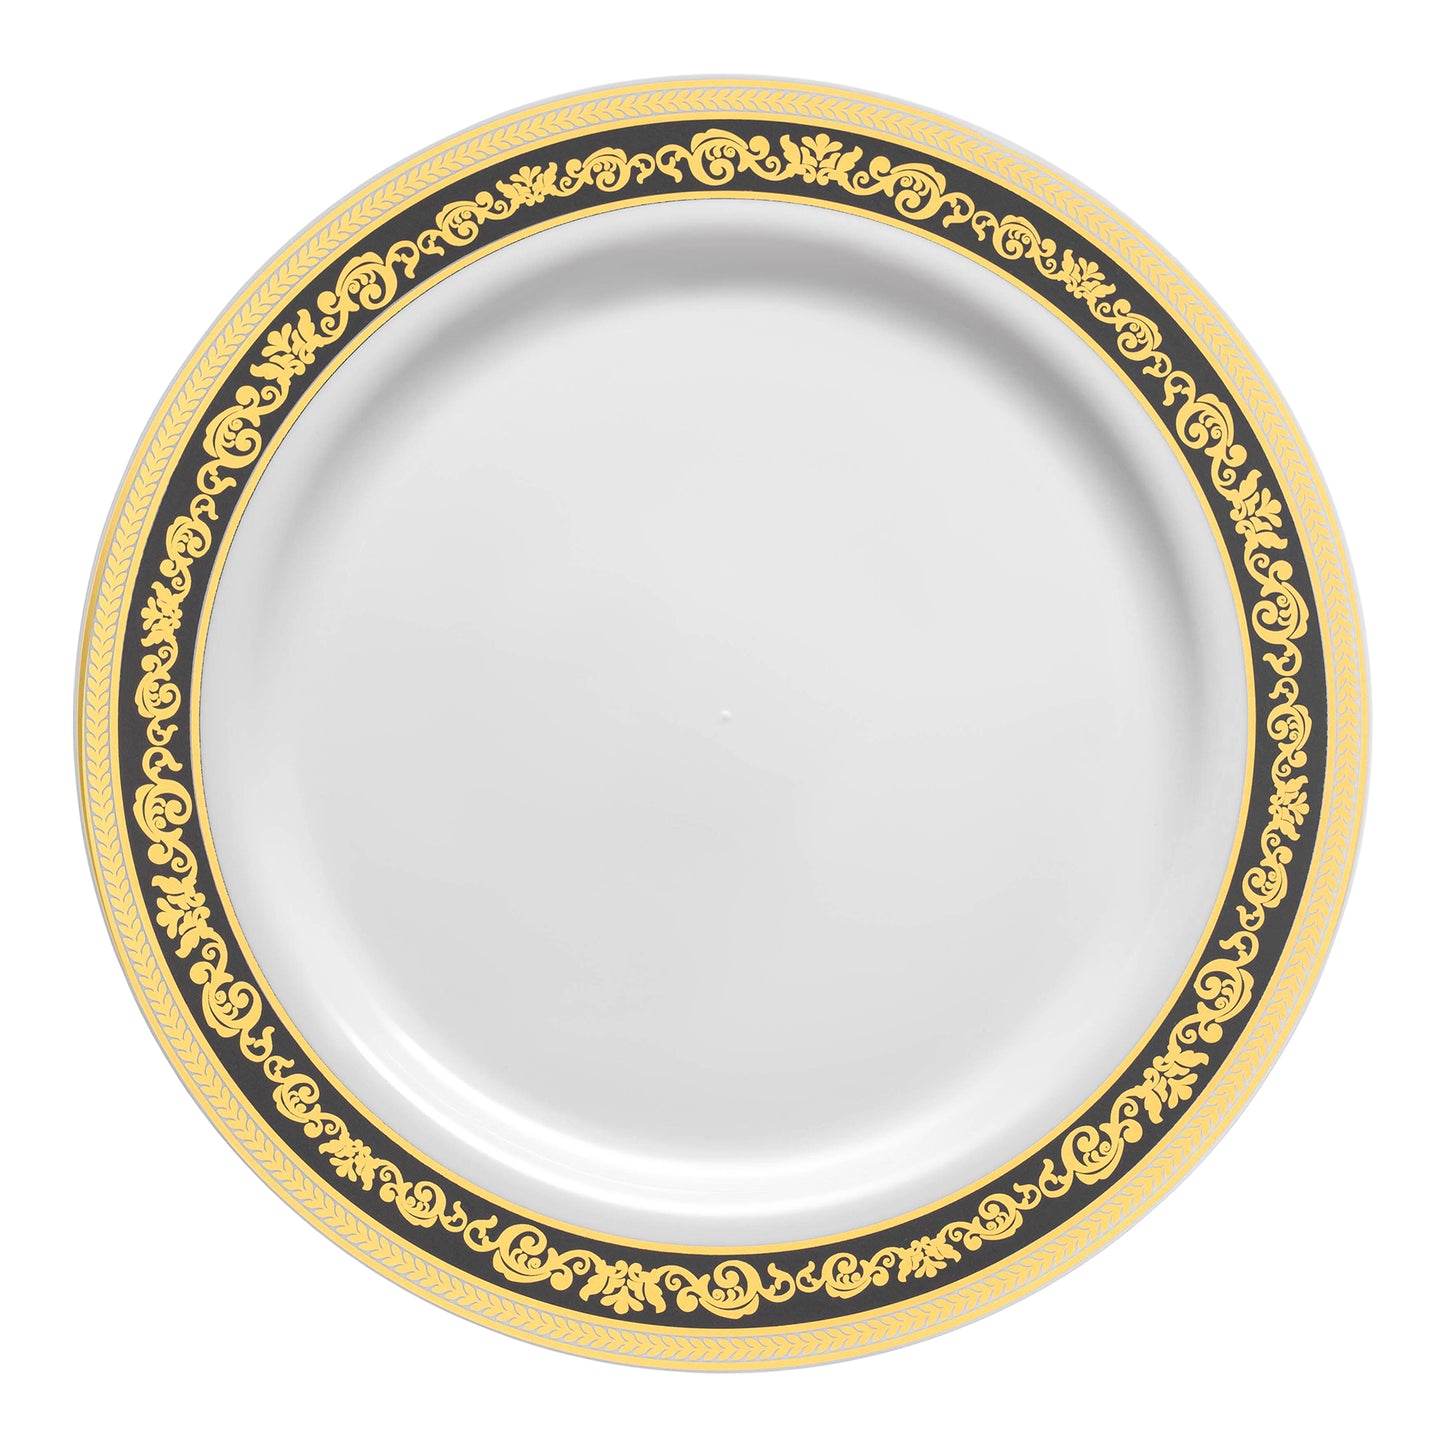 White with Black and Gold Royal Rim Plastic Dinner Plates (10.25") | The Kaya Collection